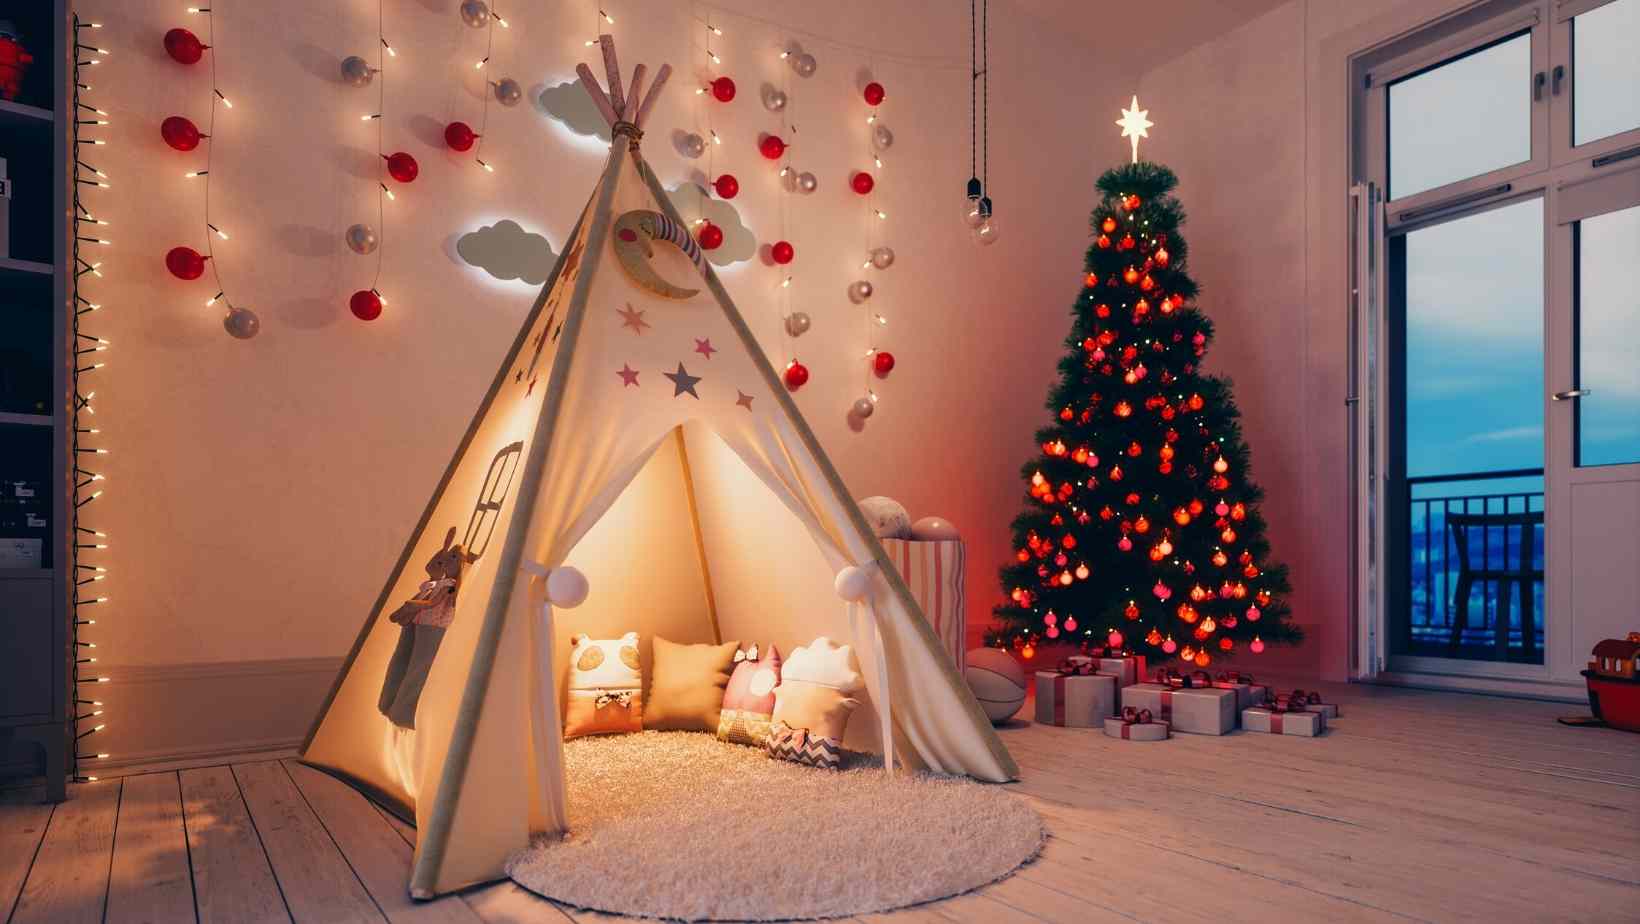 Christmas Decorating Ideas for Kid’s Room